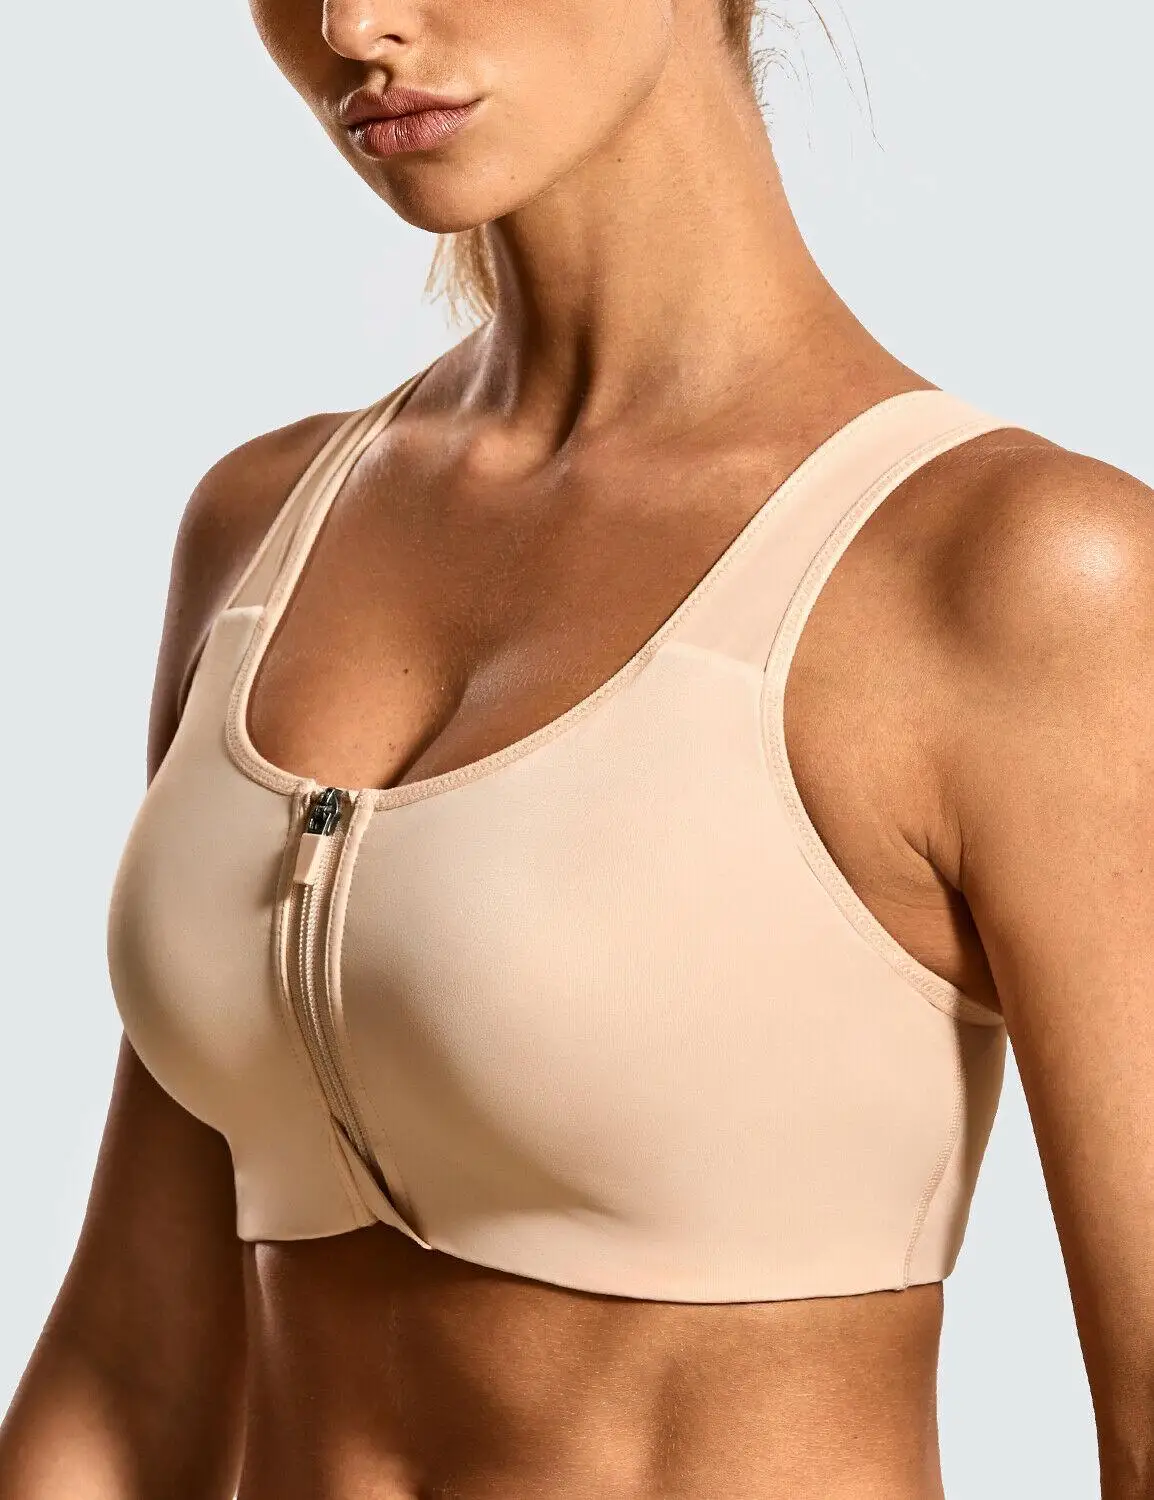 NEW HIGH IMPACT FRONT FASTENING SPORTS SECRET BRA TOP SUPPORT UK 36 CUP B C D DD 